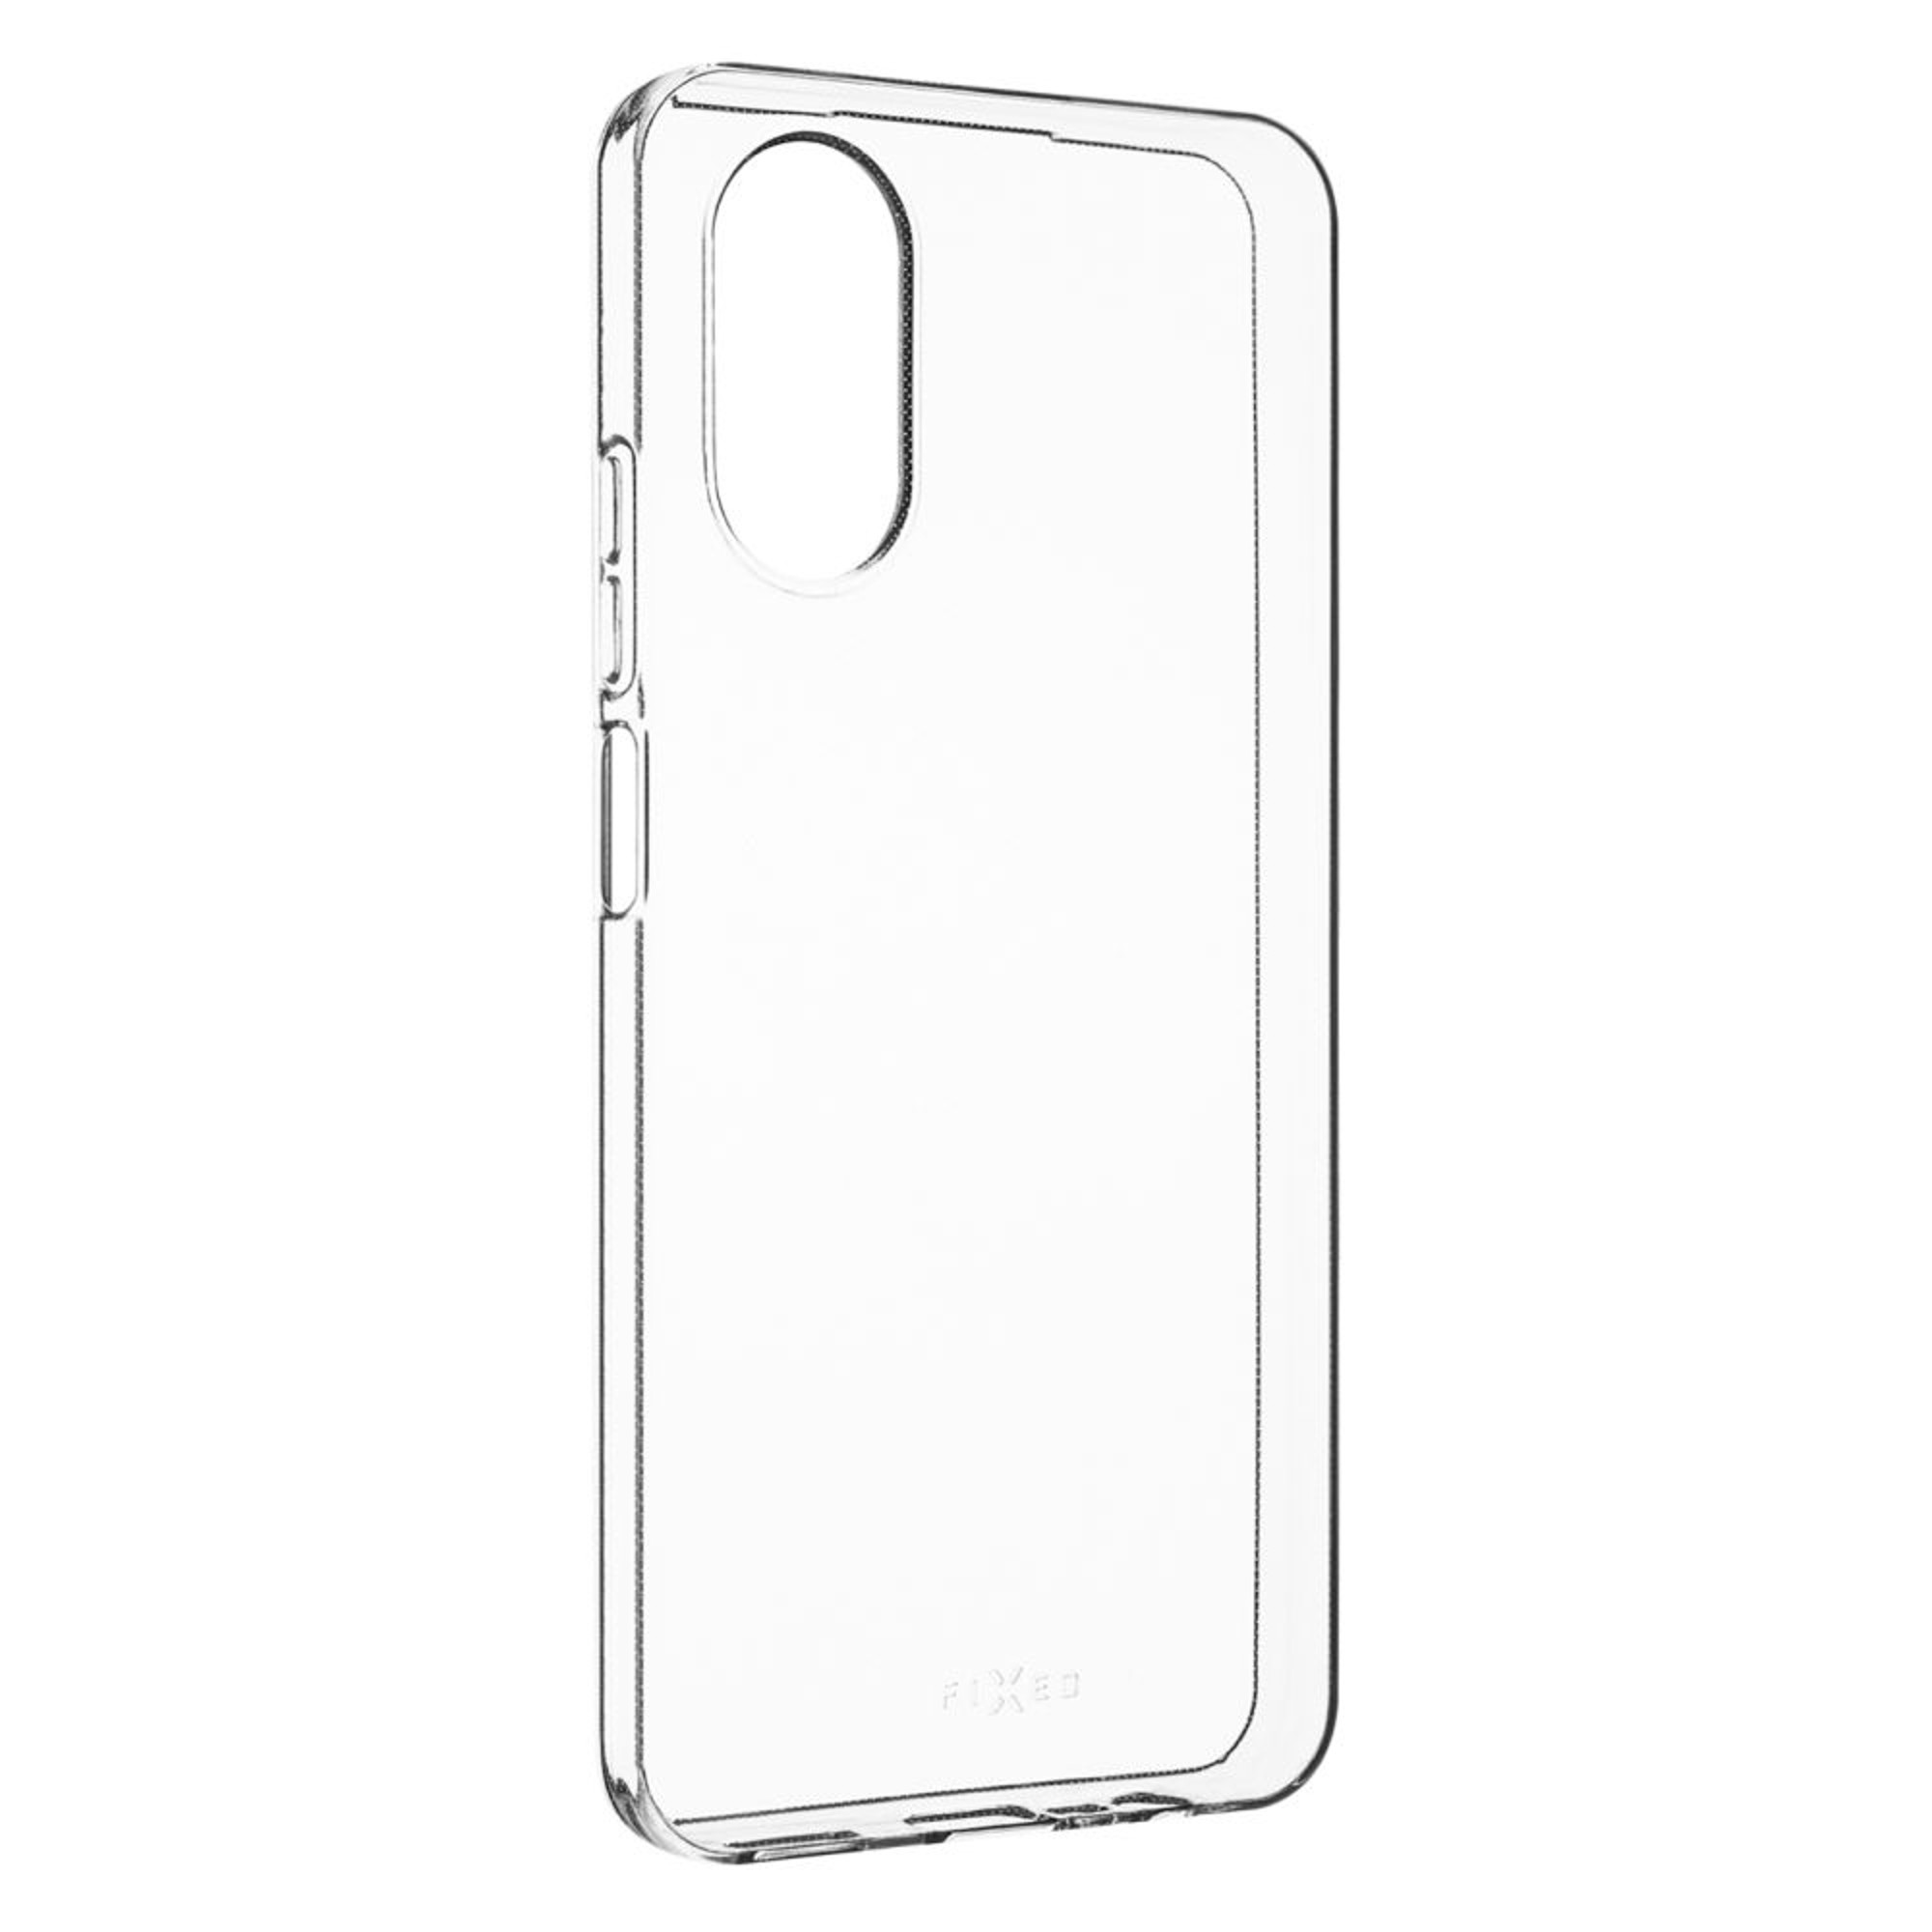 A17, FIXED Transparent Backcover, OPPO, FIXTCC-1189,